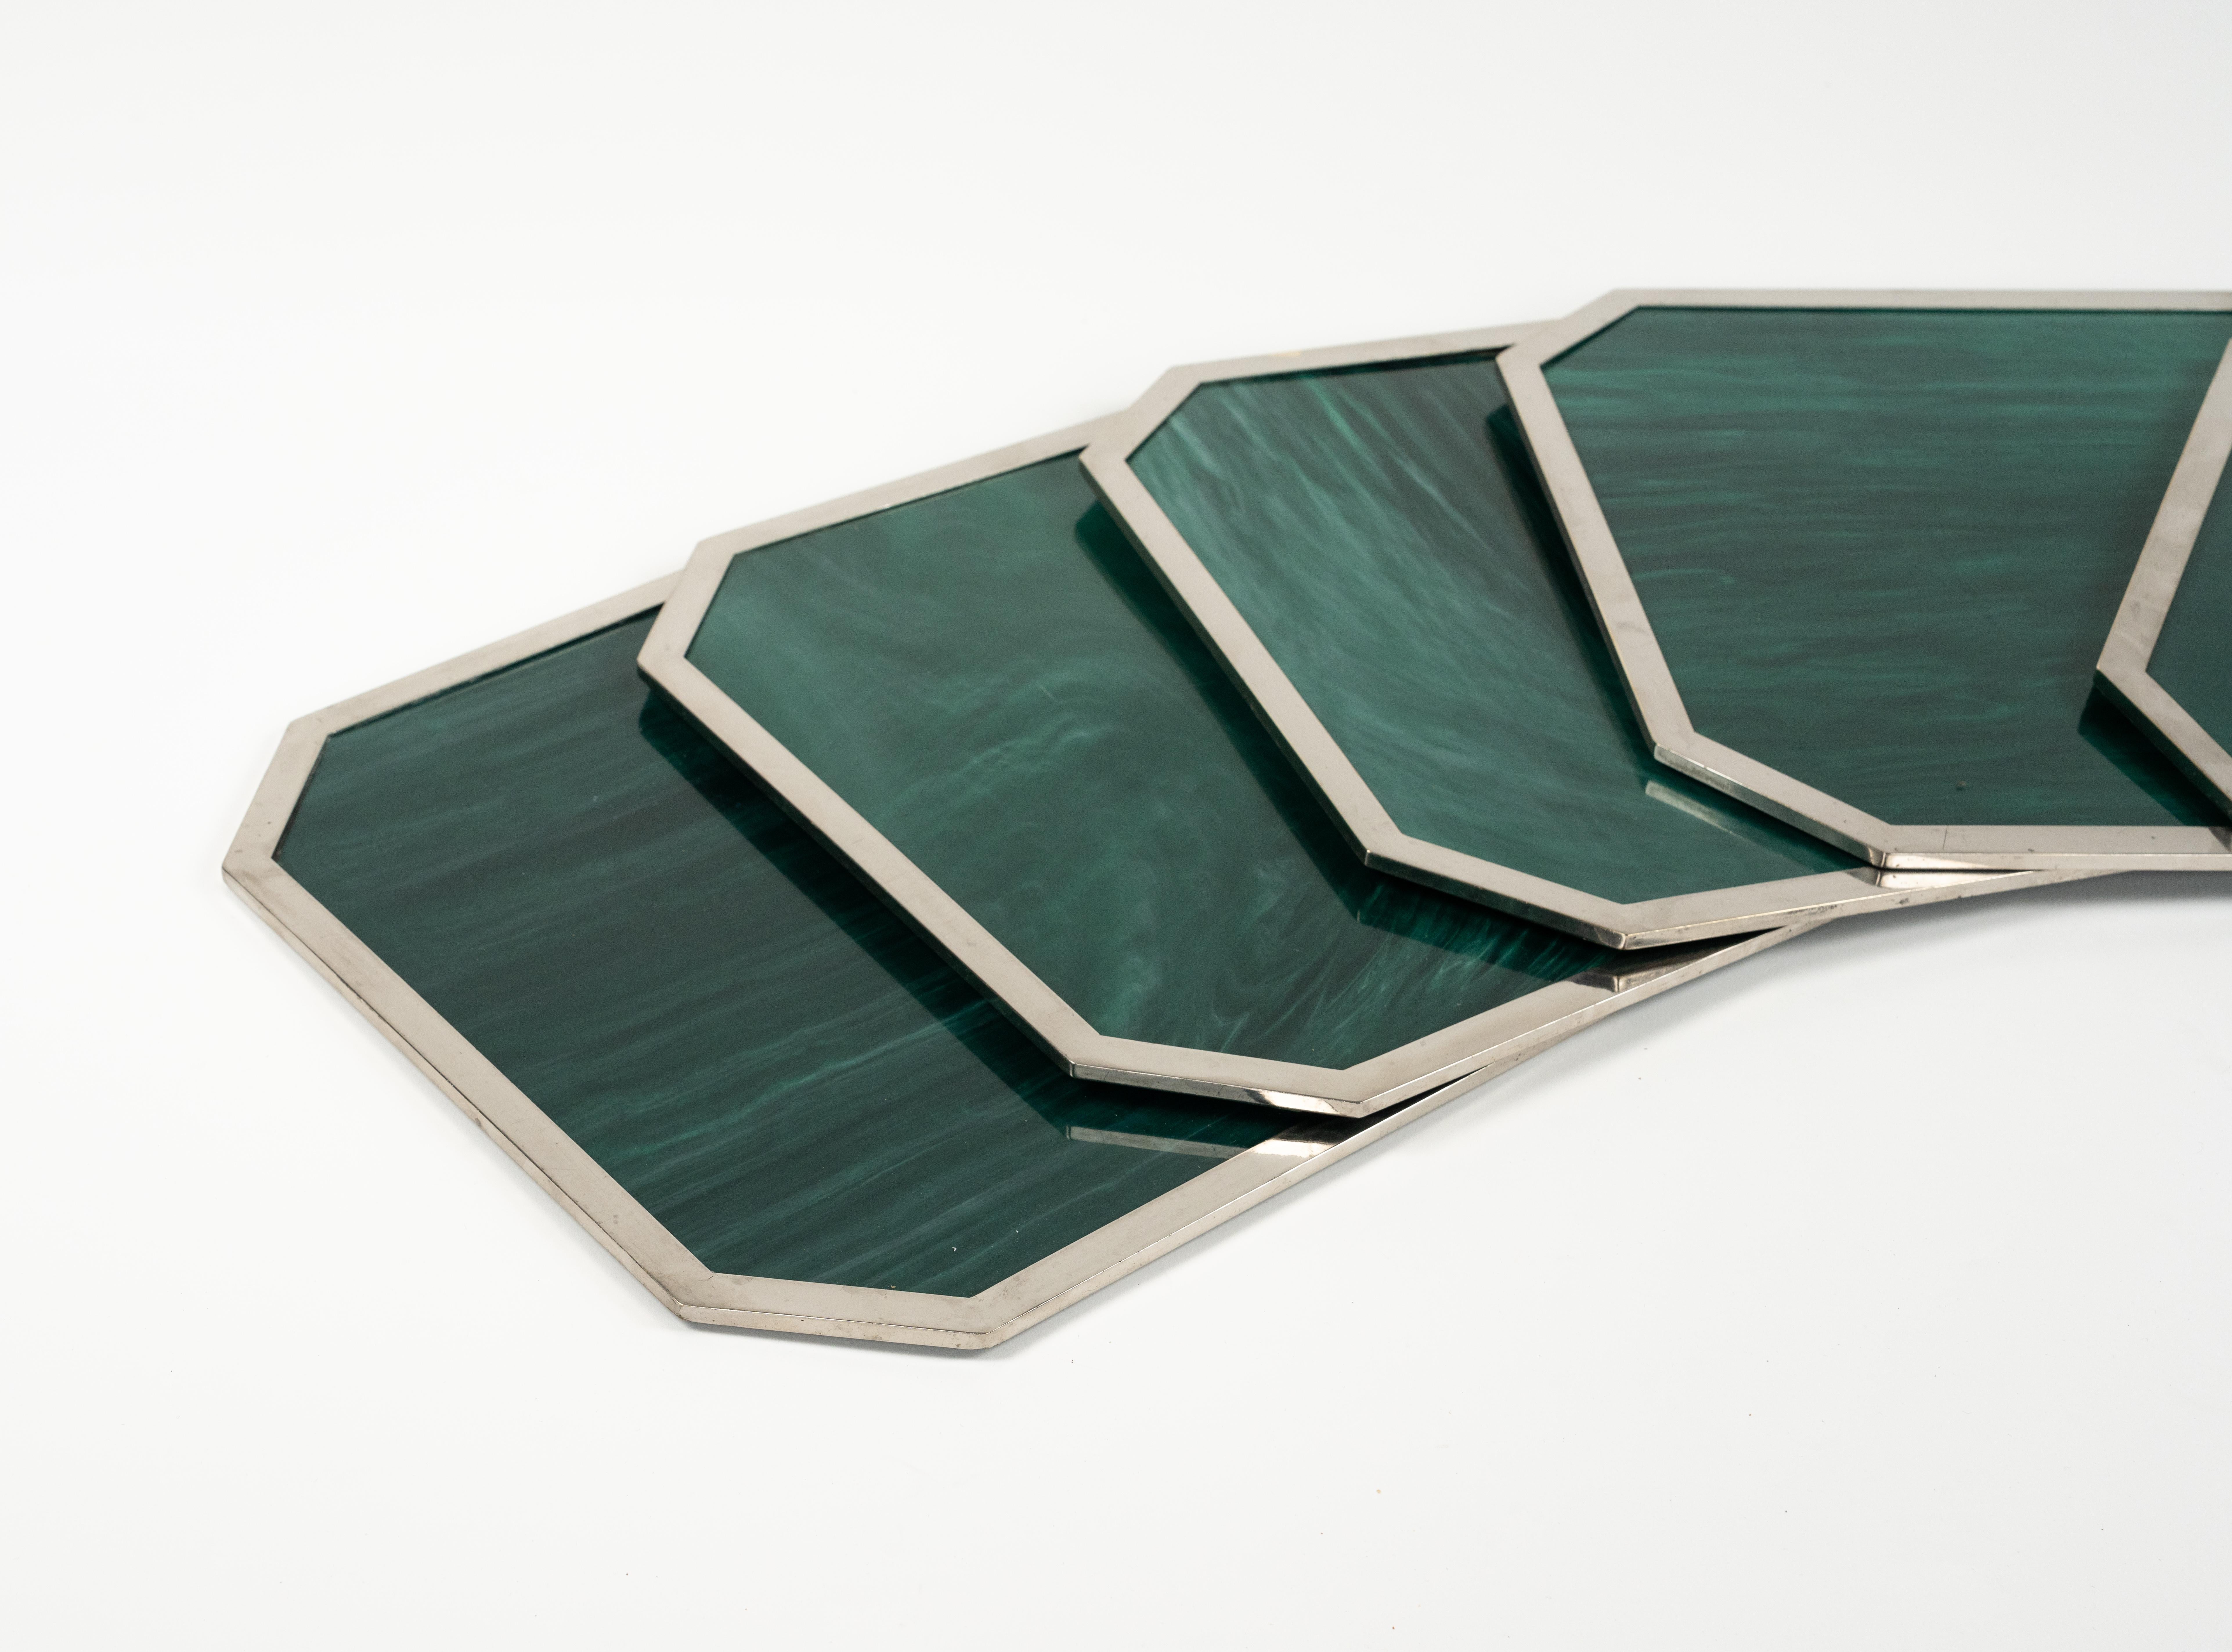 Set of Seven Placemats Marble Effect Acrylic & Chrome by B B Genova, Italy 1970s For Sale 7